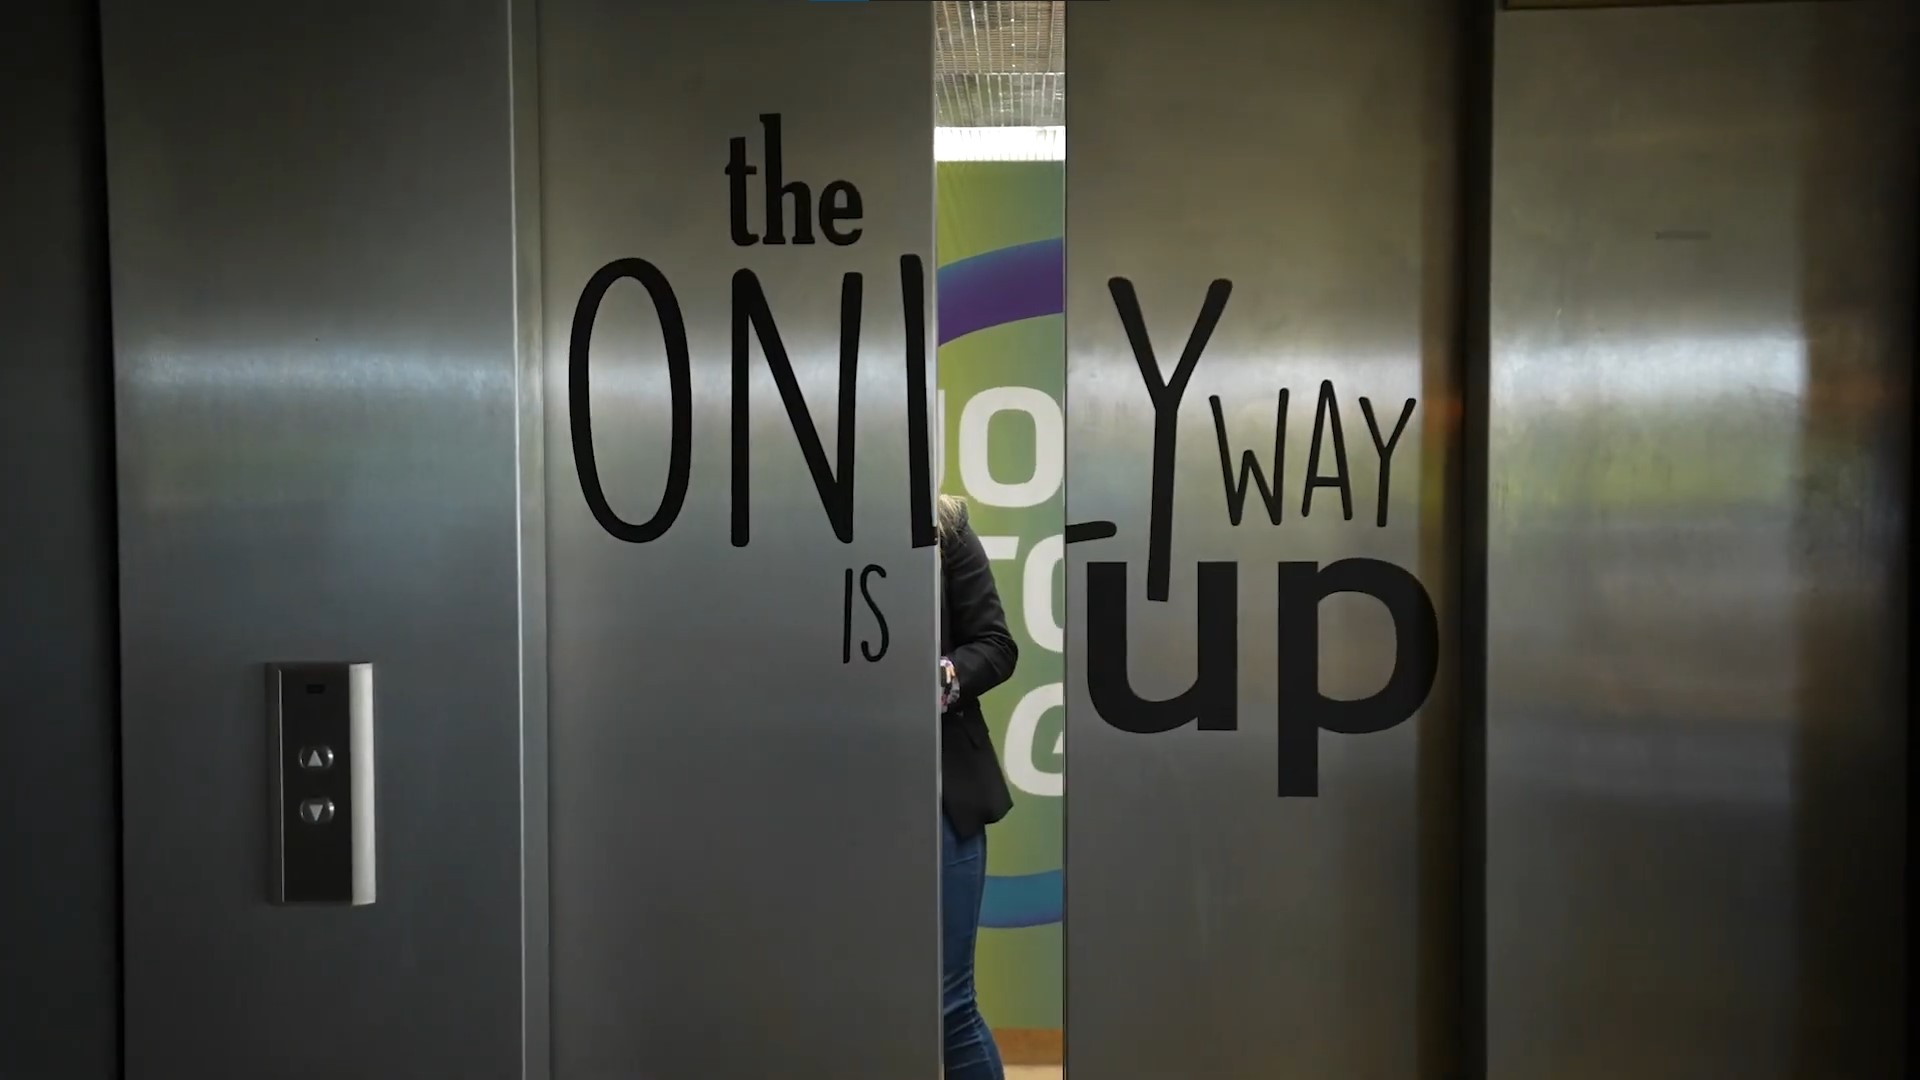 The only way is up